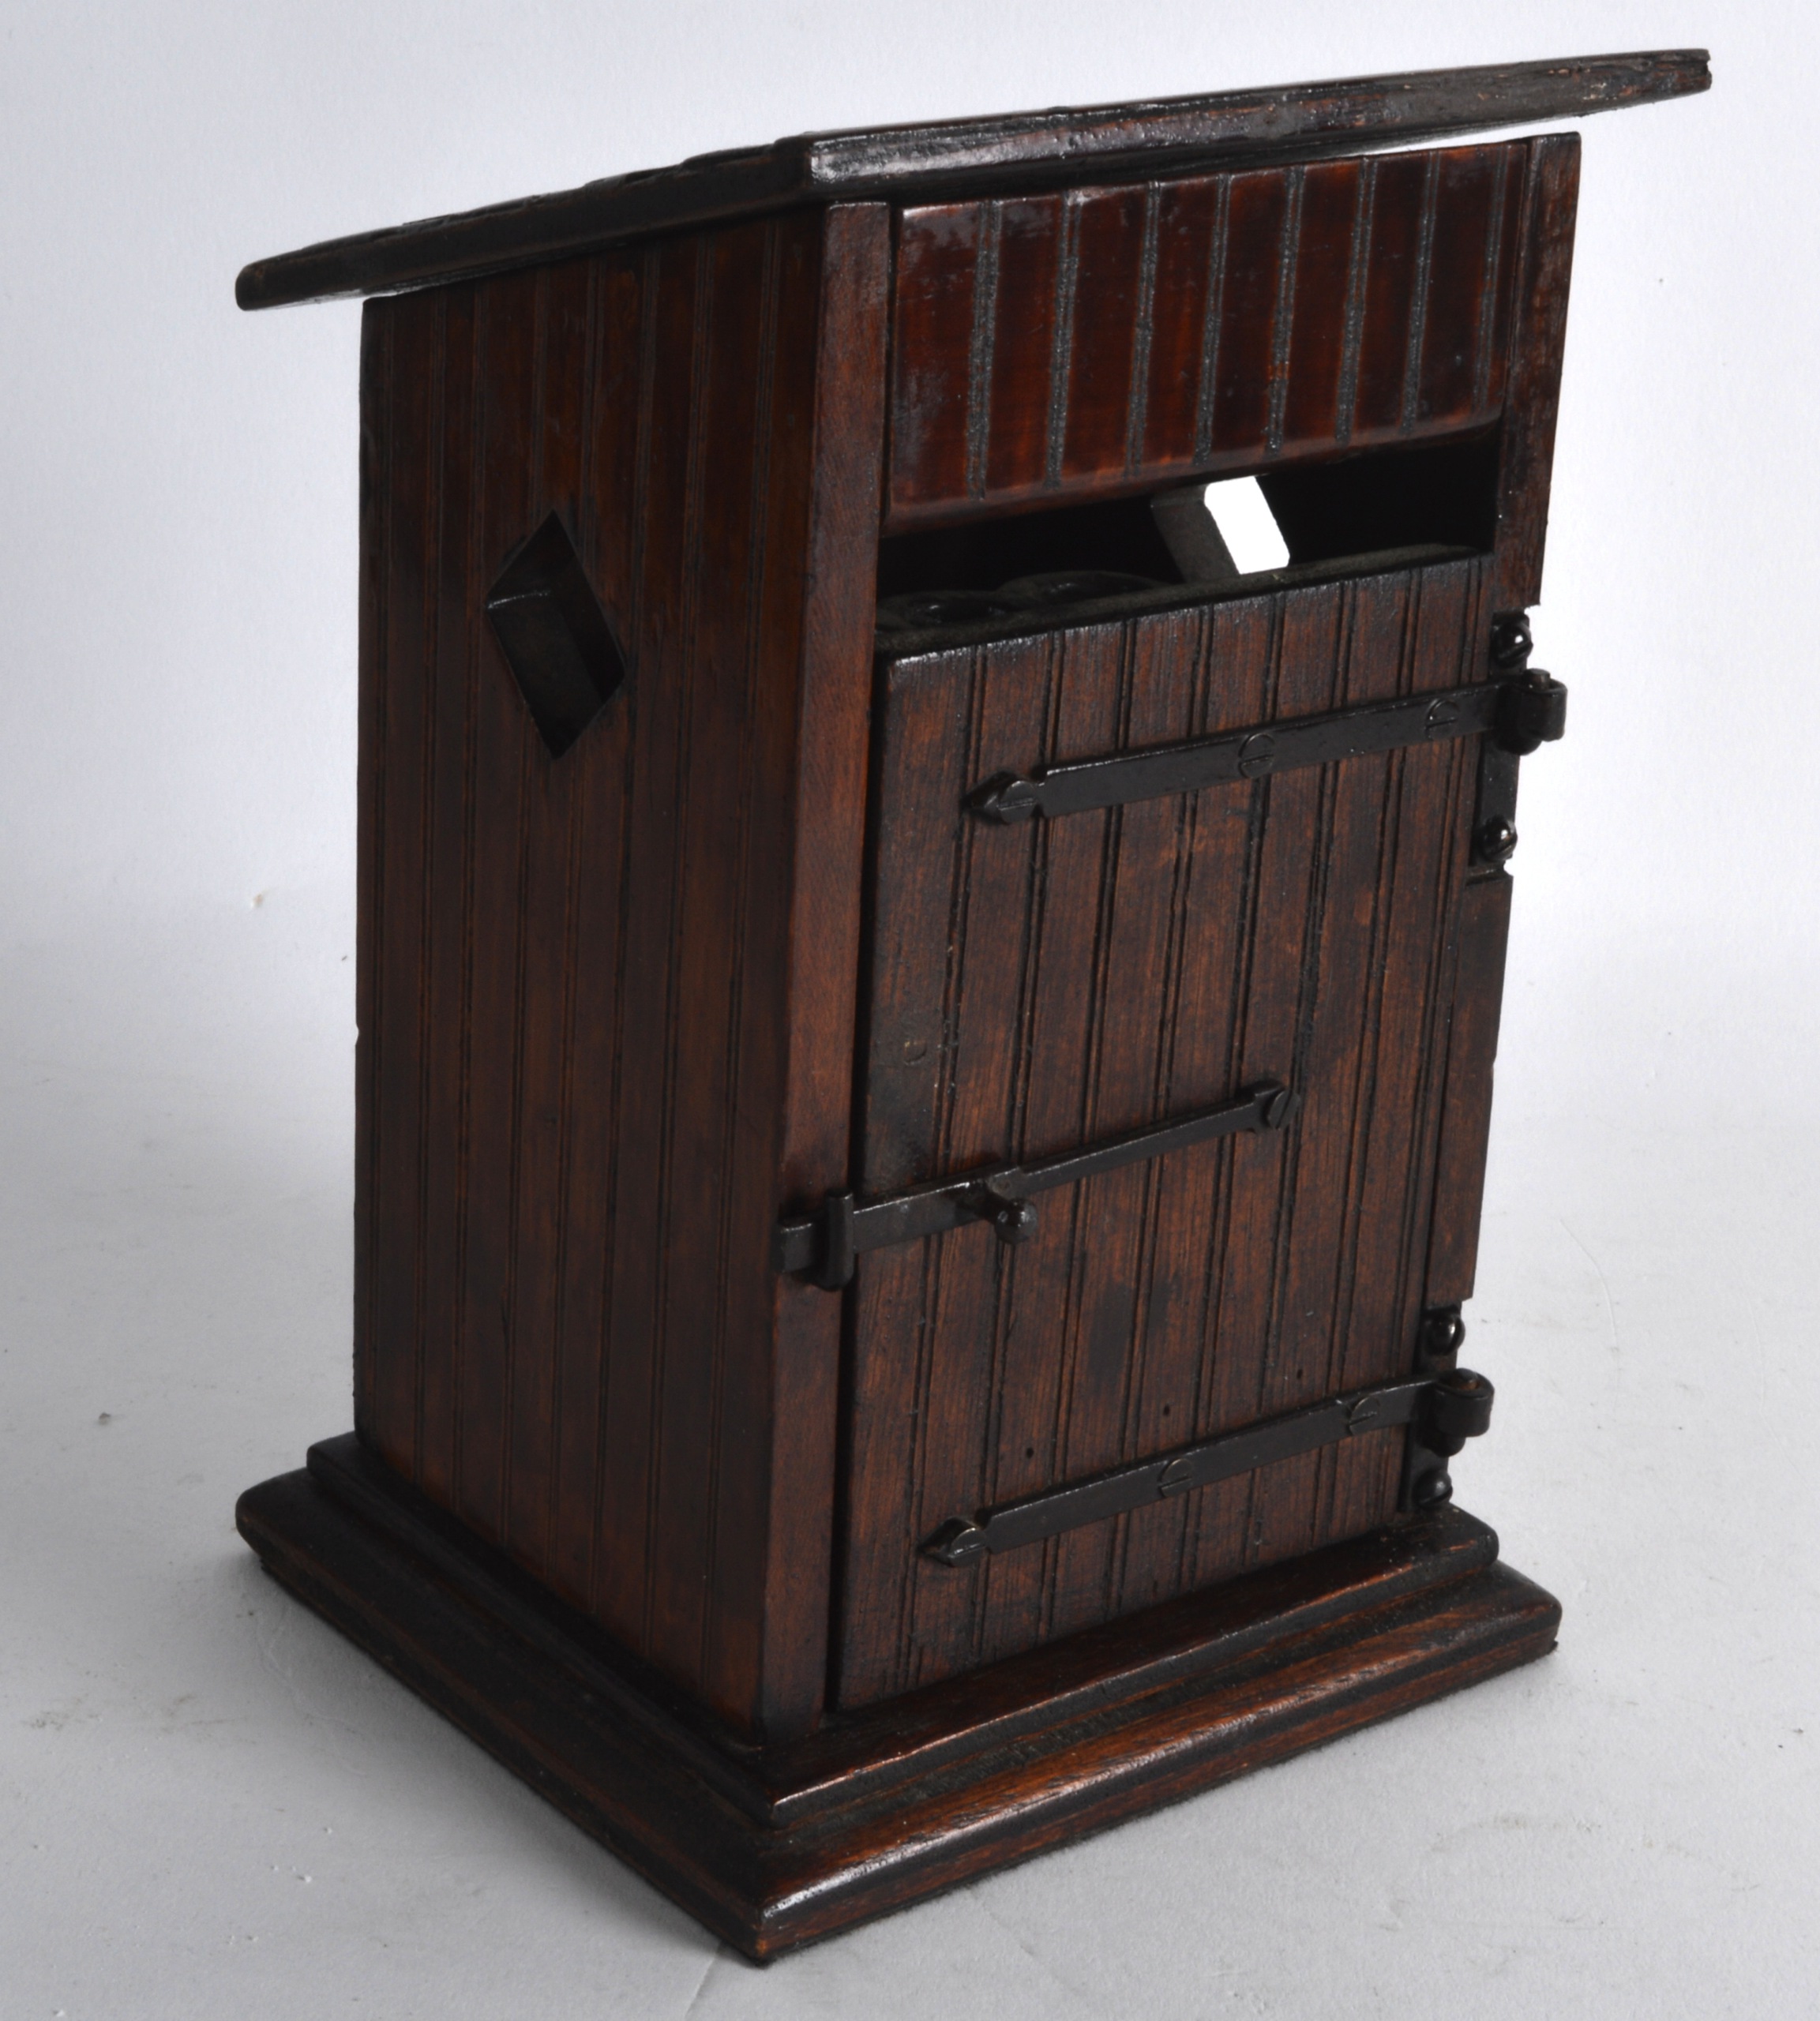 AN UNUSUAL LATE 19TH/20TH CENTURY CARVED WOOD DESK TIDY in the form of an outside toilet, with